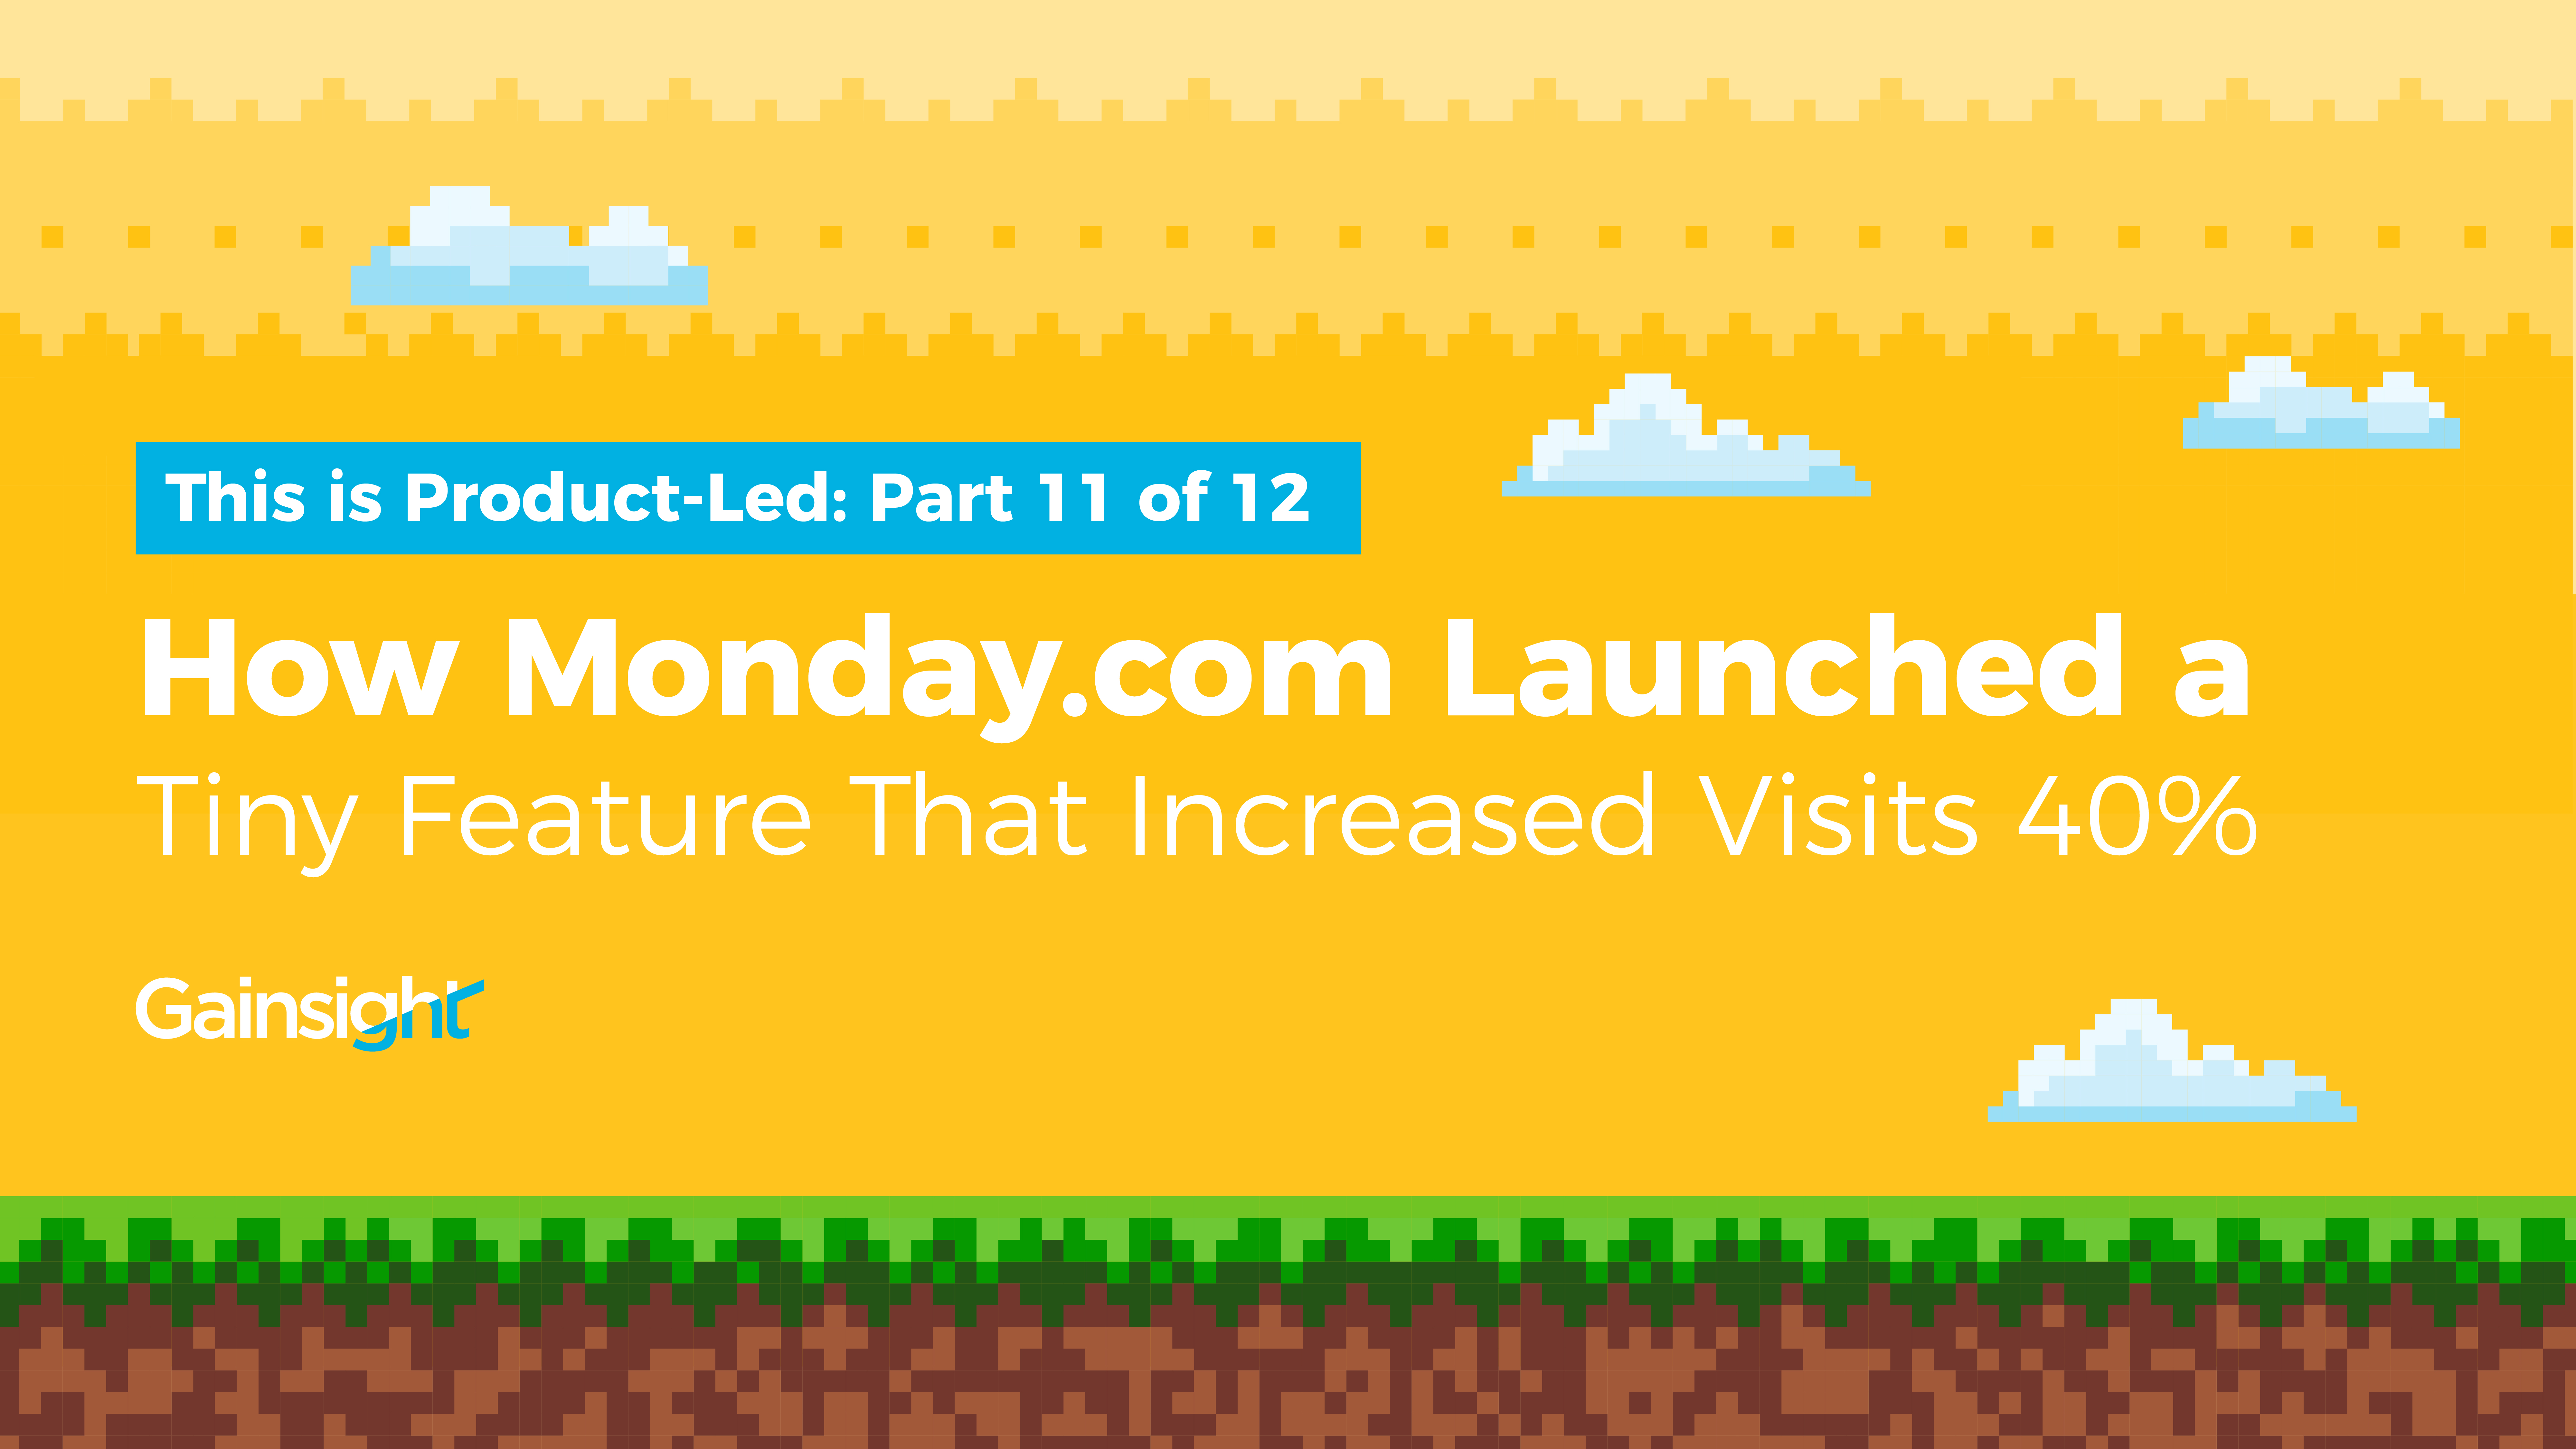 How Monday.com Launched a Tiny Feature That Increased Visits 40% Image